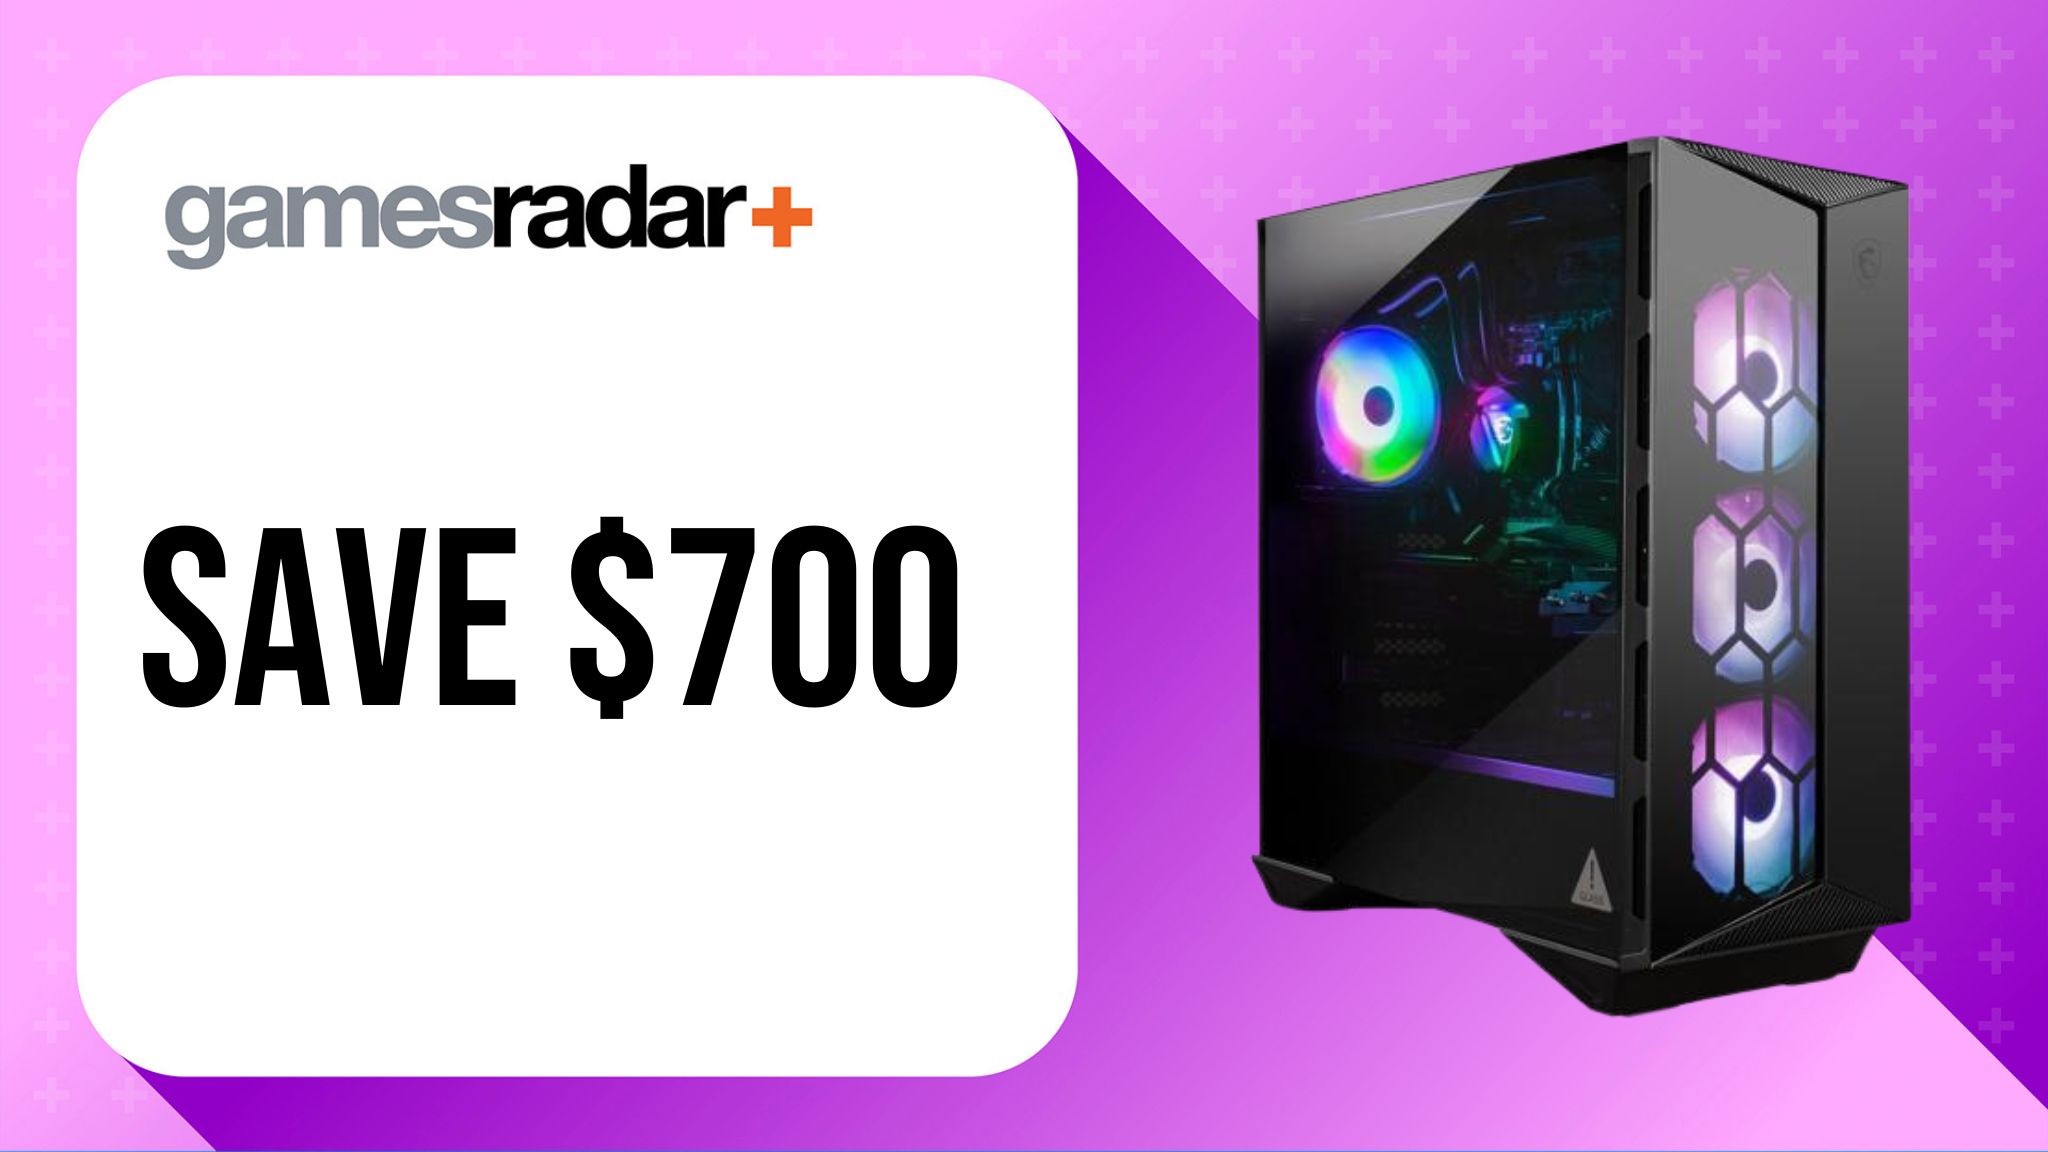 MSI Aegis R deal image saves $700 with a purple background